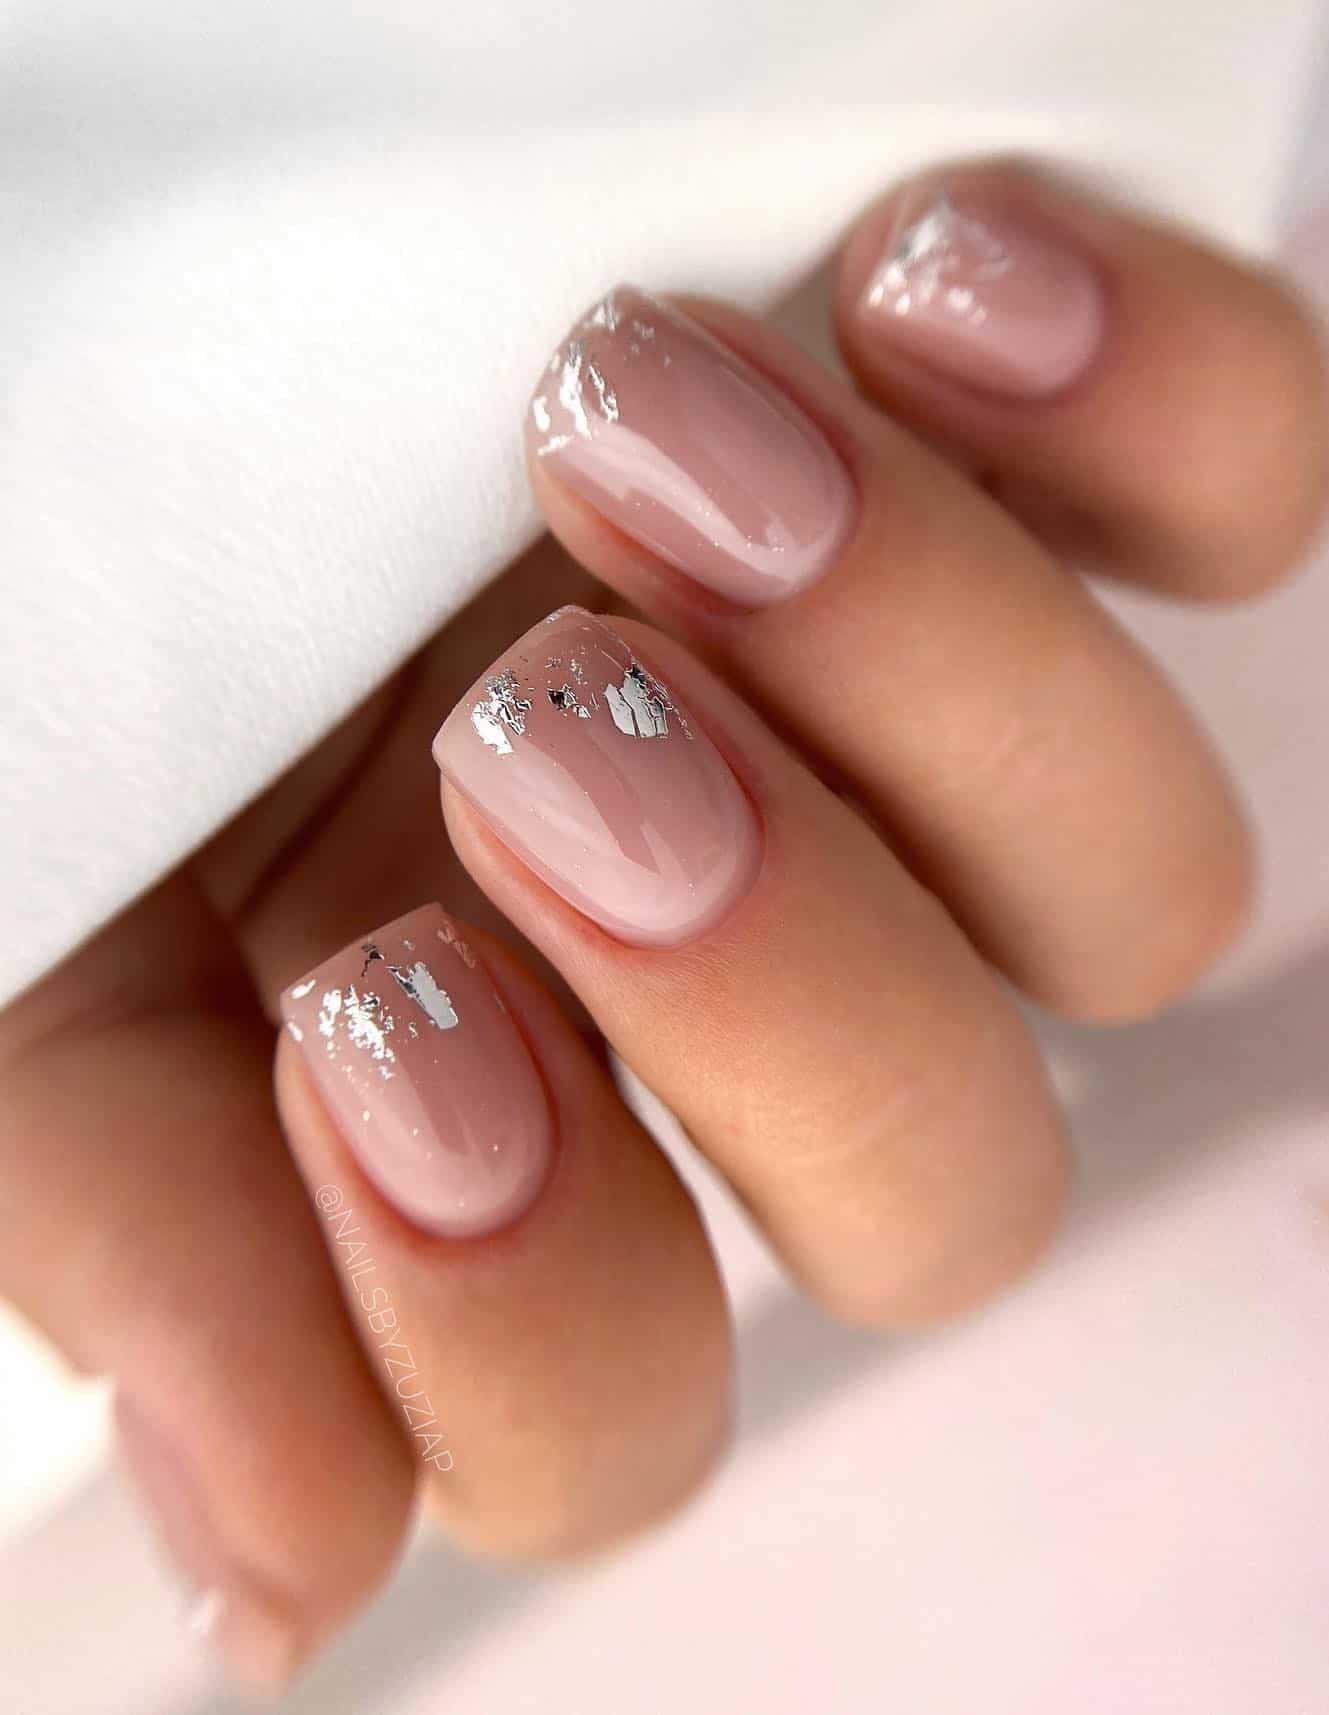 A hand with short square nails painted a nude color with silver flakes along the tips